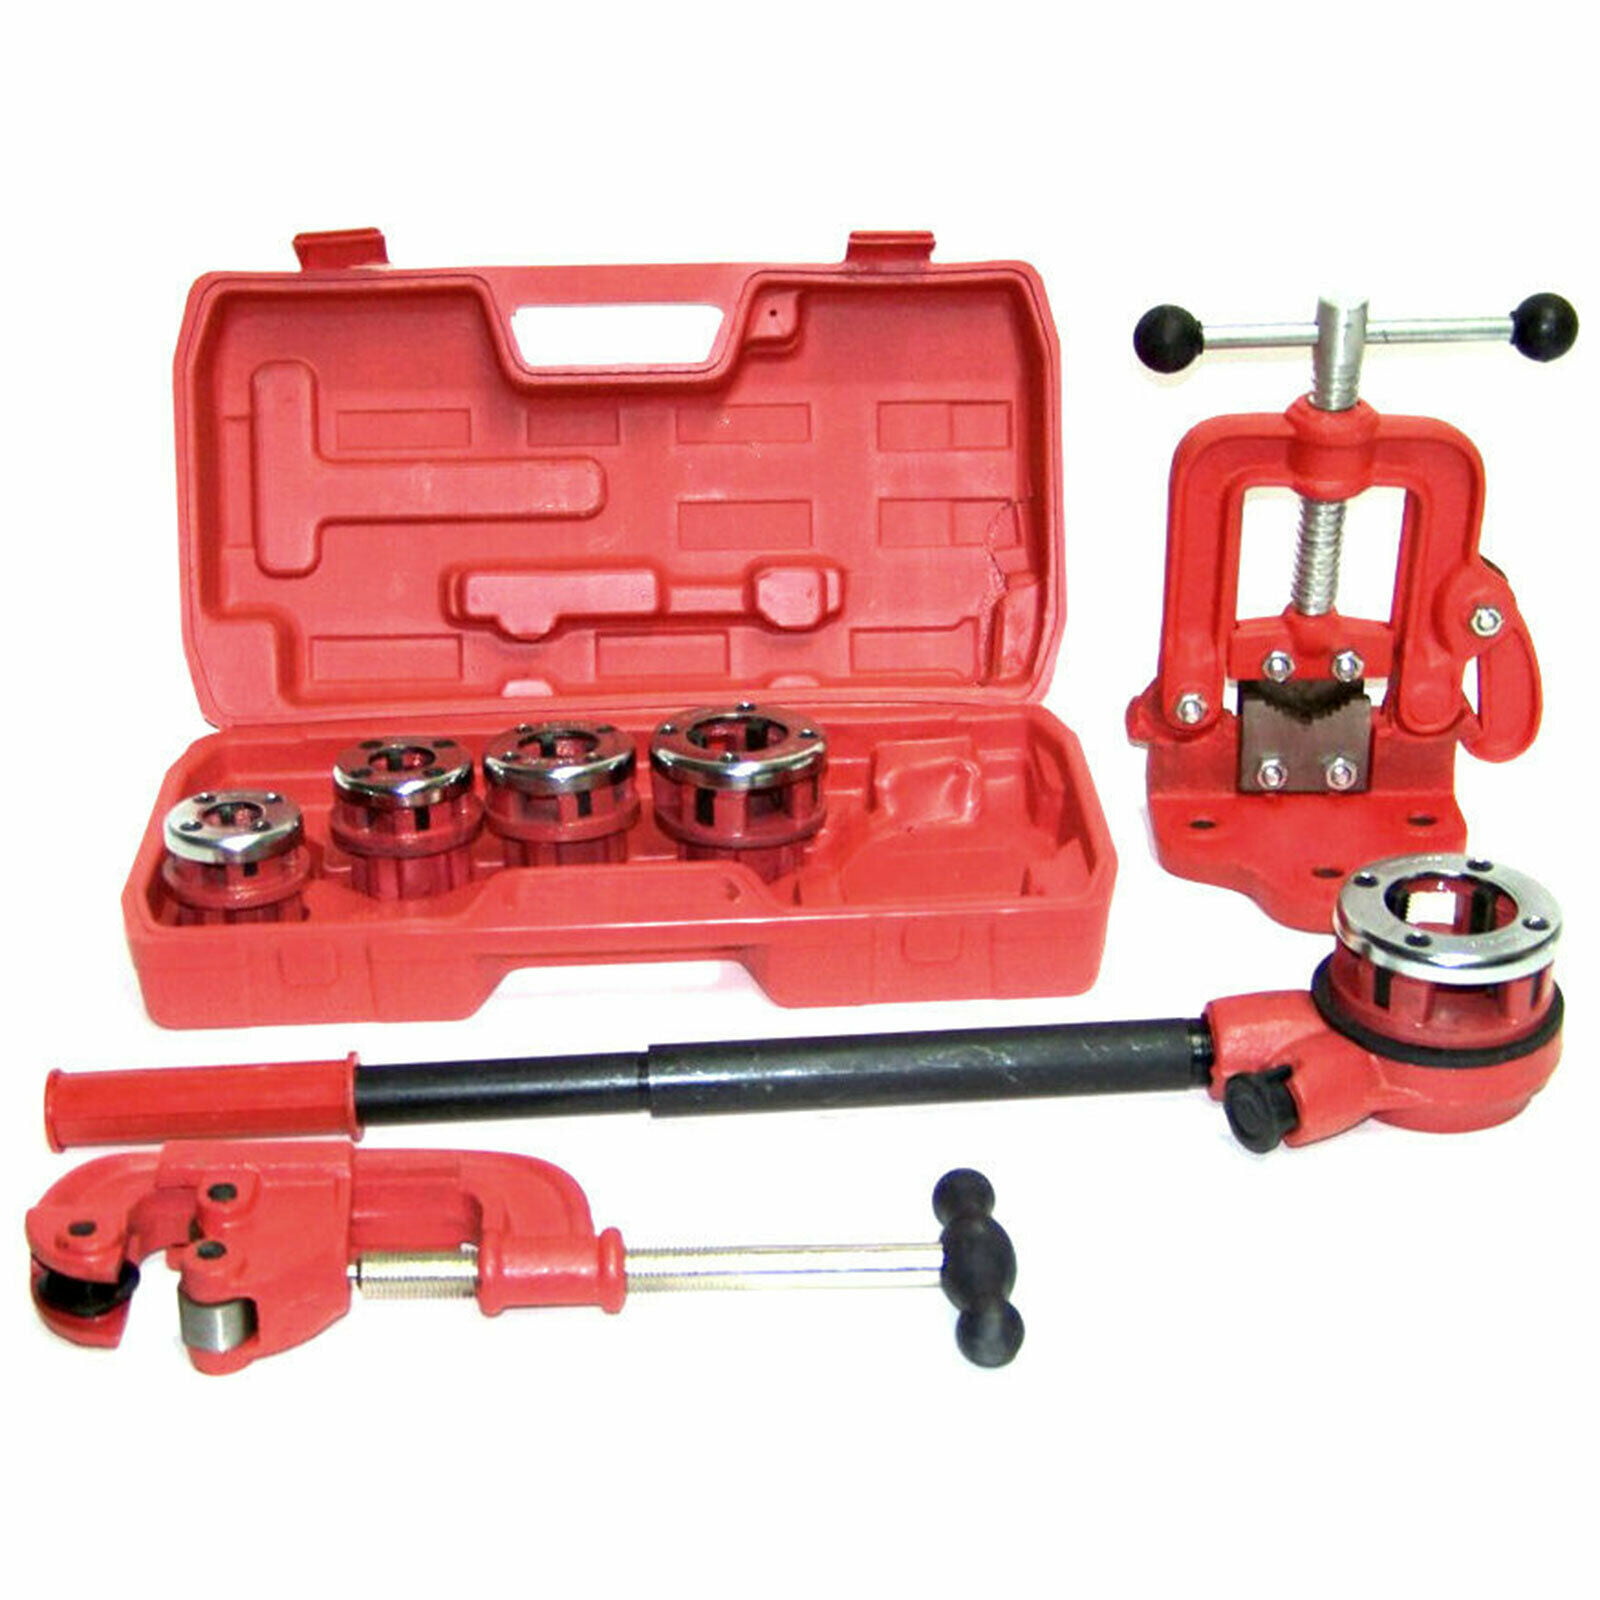 Box 6 Manual 4 Threading Dies Pipe Cutter & Wrenches Kit Ratchet Pipe Threader 